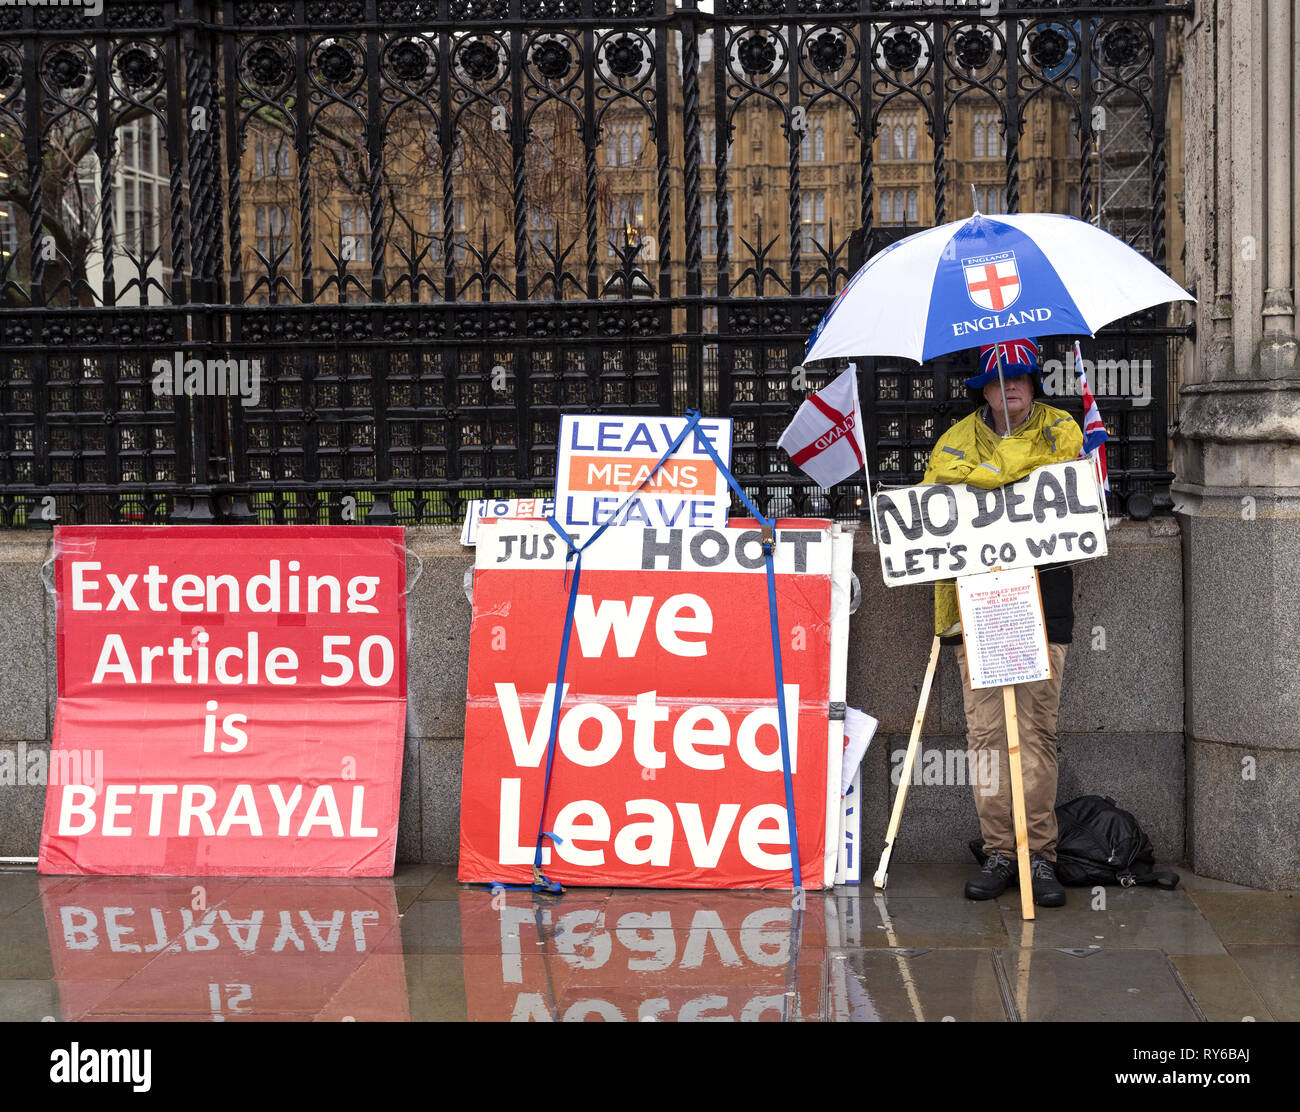 London, UK. 12th Mar, 2019. Pro - Brexit leave the European Union supporter protesting outside the Houses of Parliament. Credit: AndKa/Alamy Live News Stock Photo